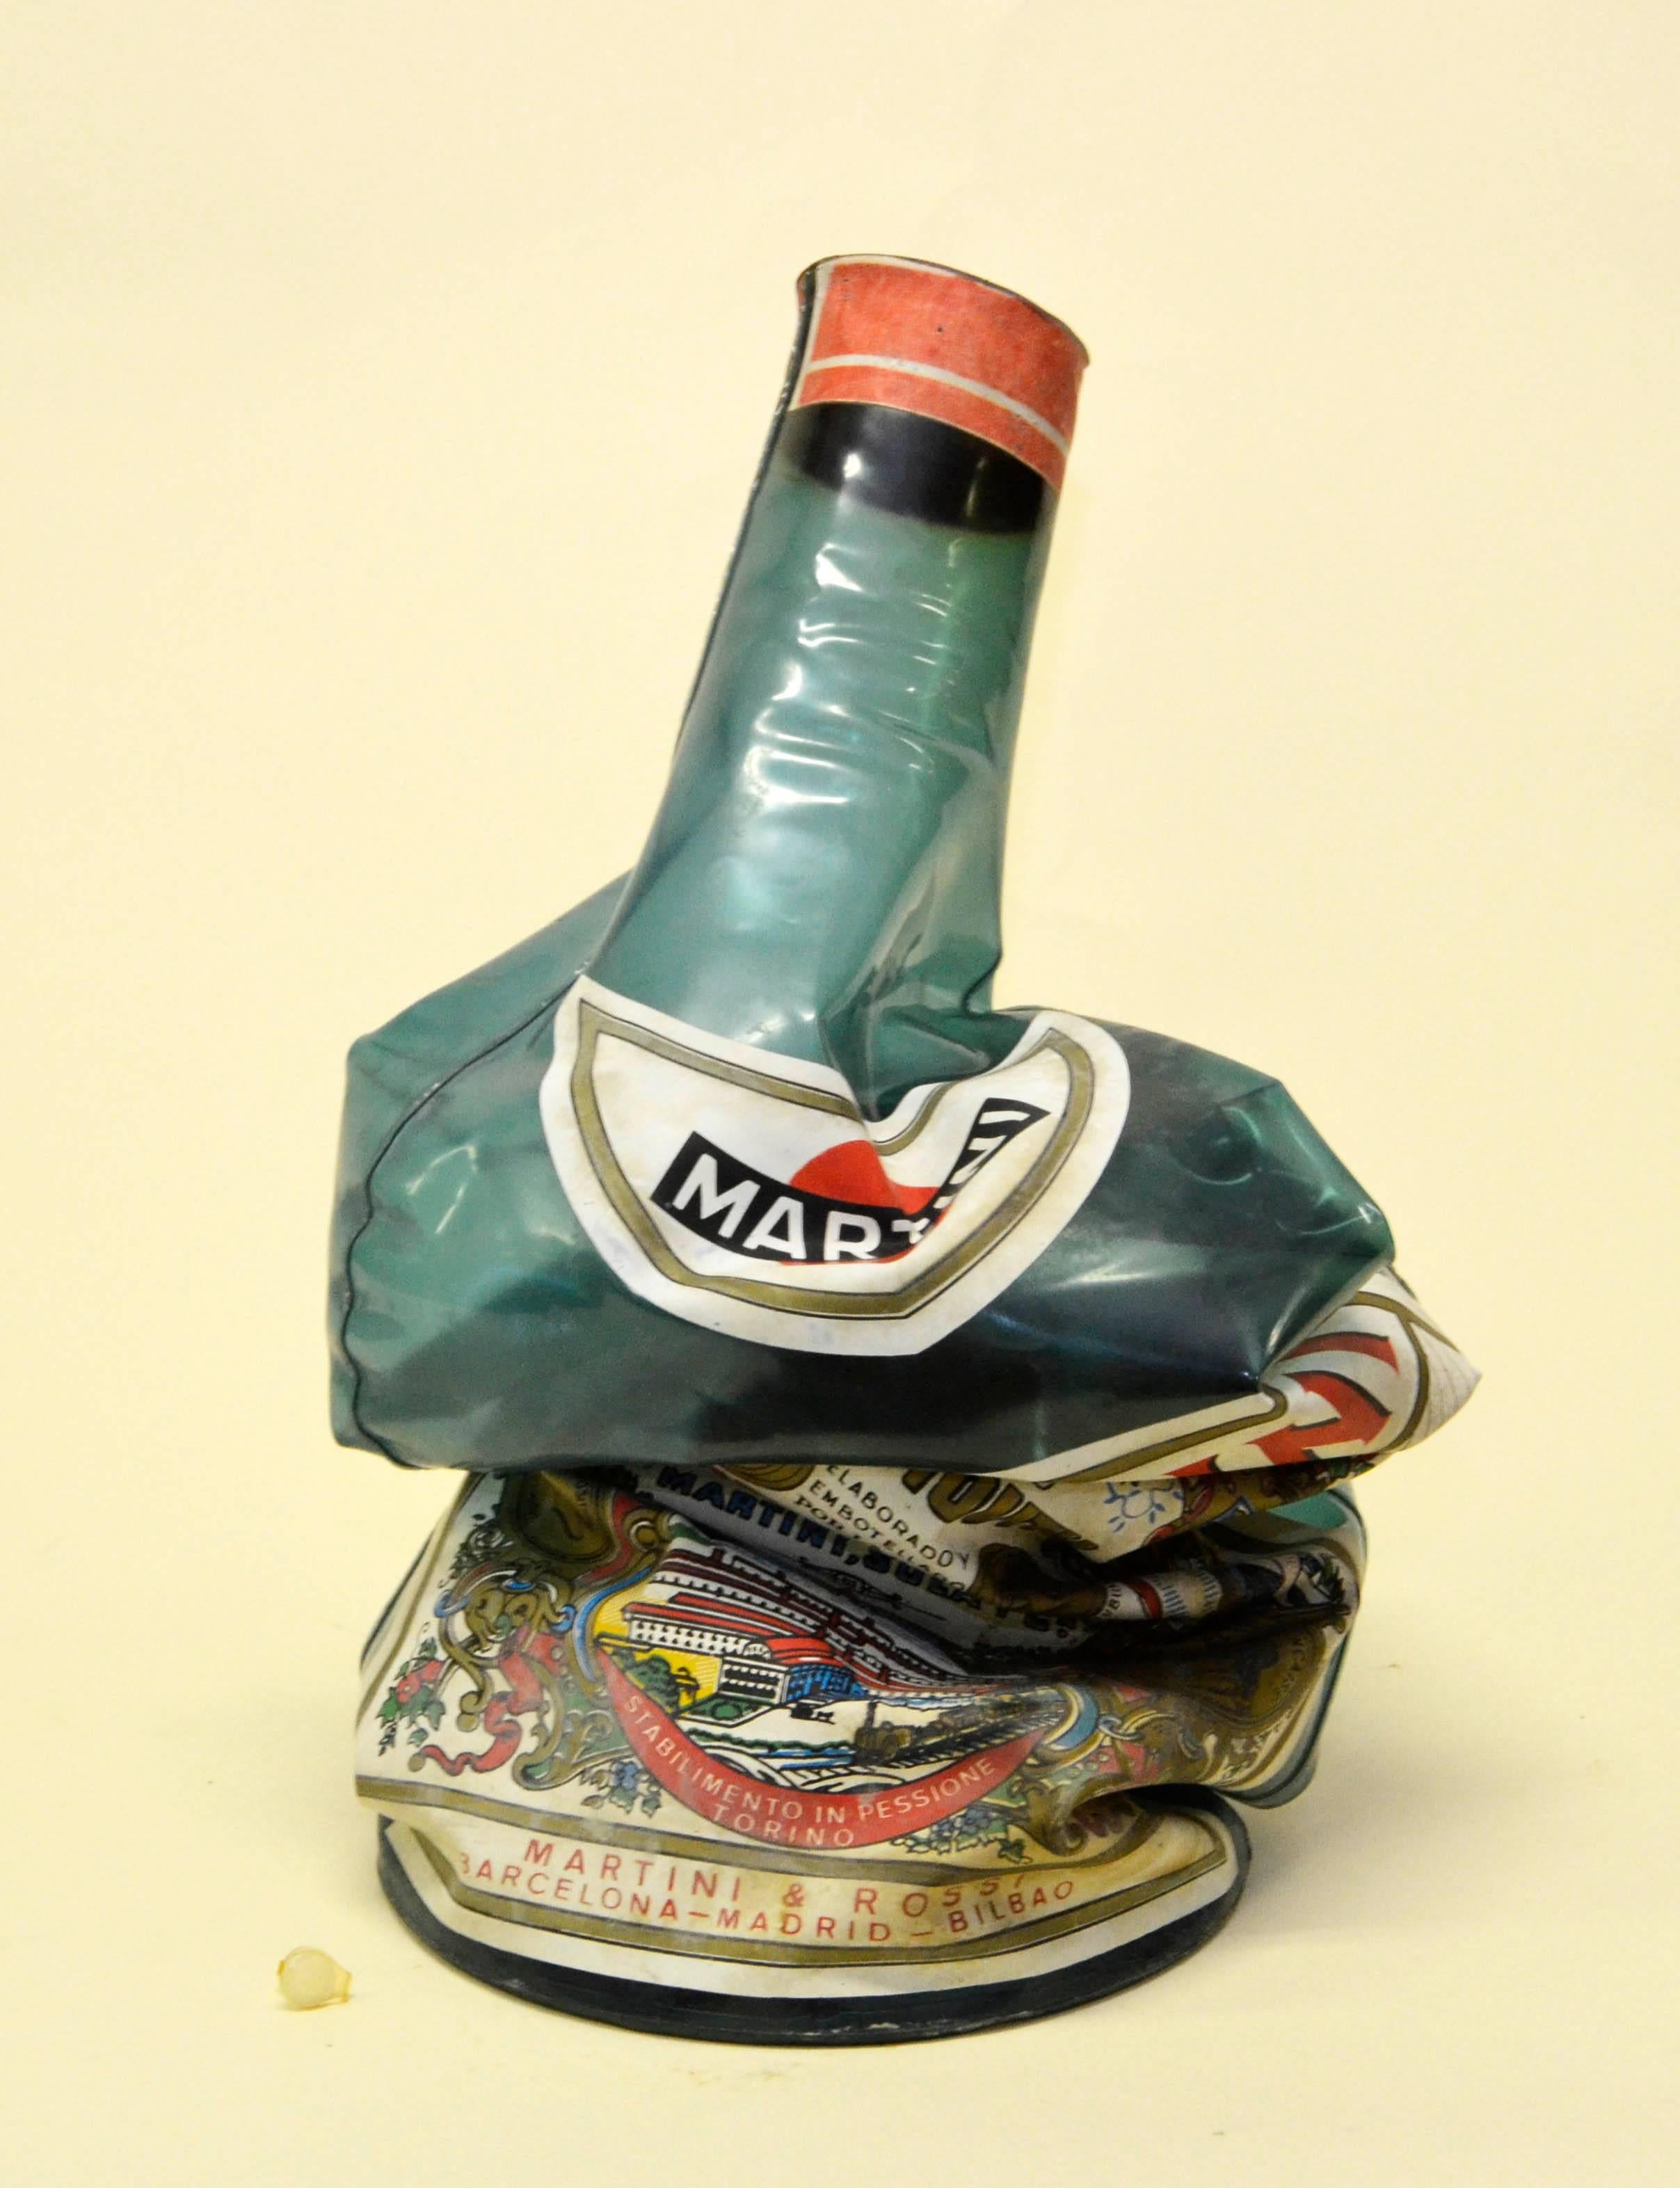 1970s Large Spanish Inflatable Martini & Rossi Promotion Plastic Bottle For Sale 1